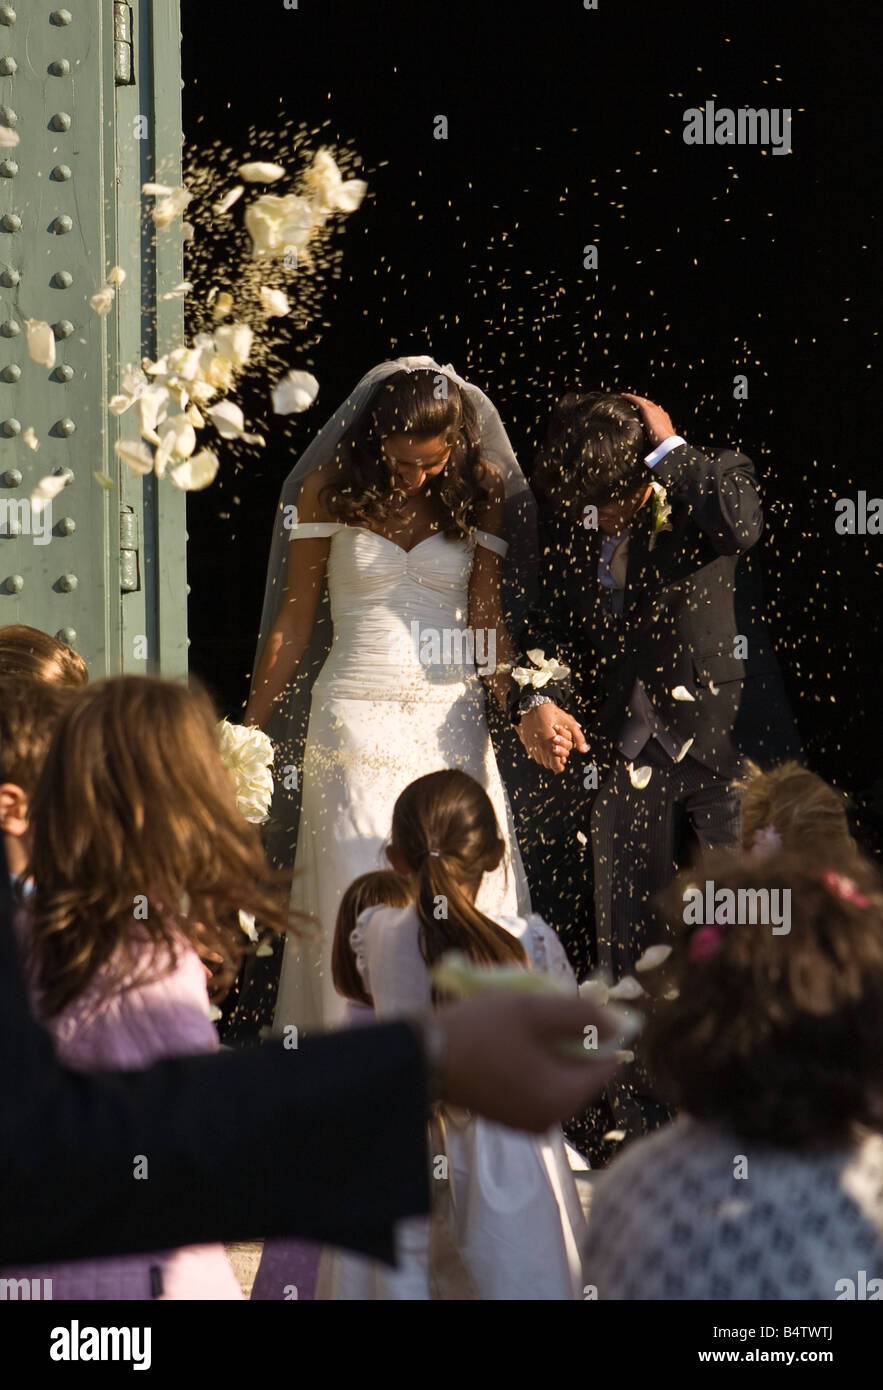 Newlyweds coming out of the church of San Miniato al Monte in Florence, Italy under a shower of rice, flowers and confetti. Stock Photo